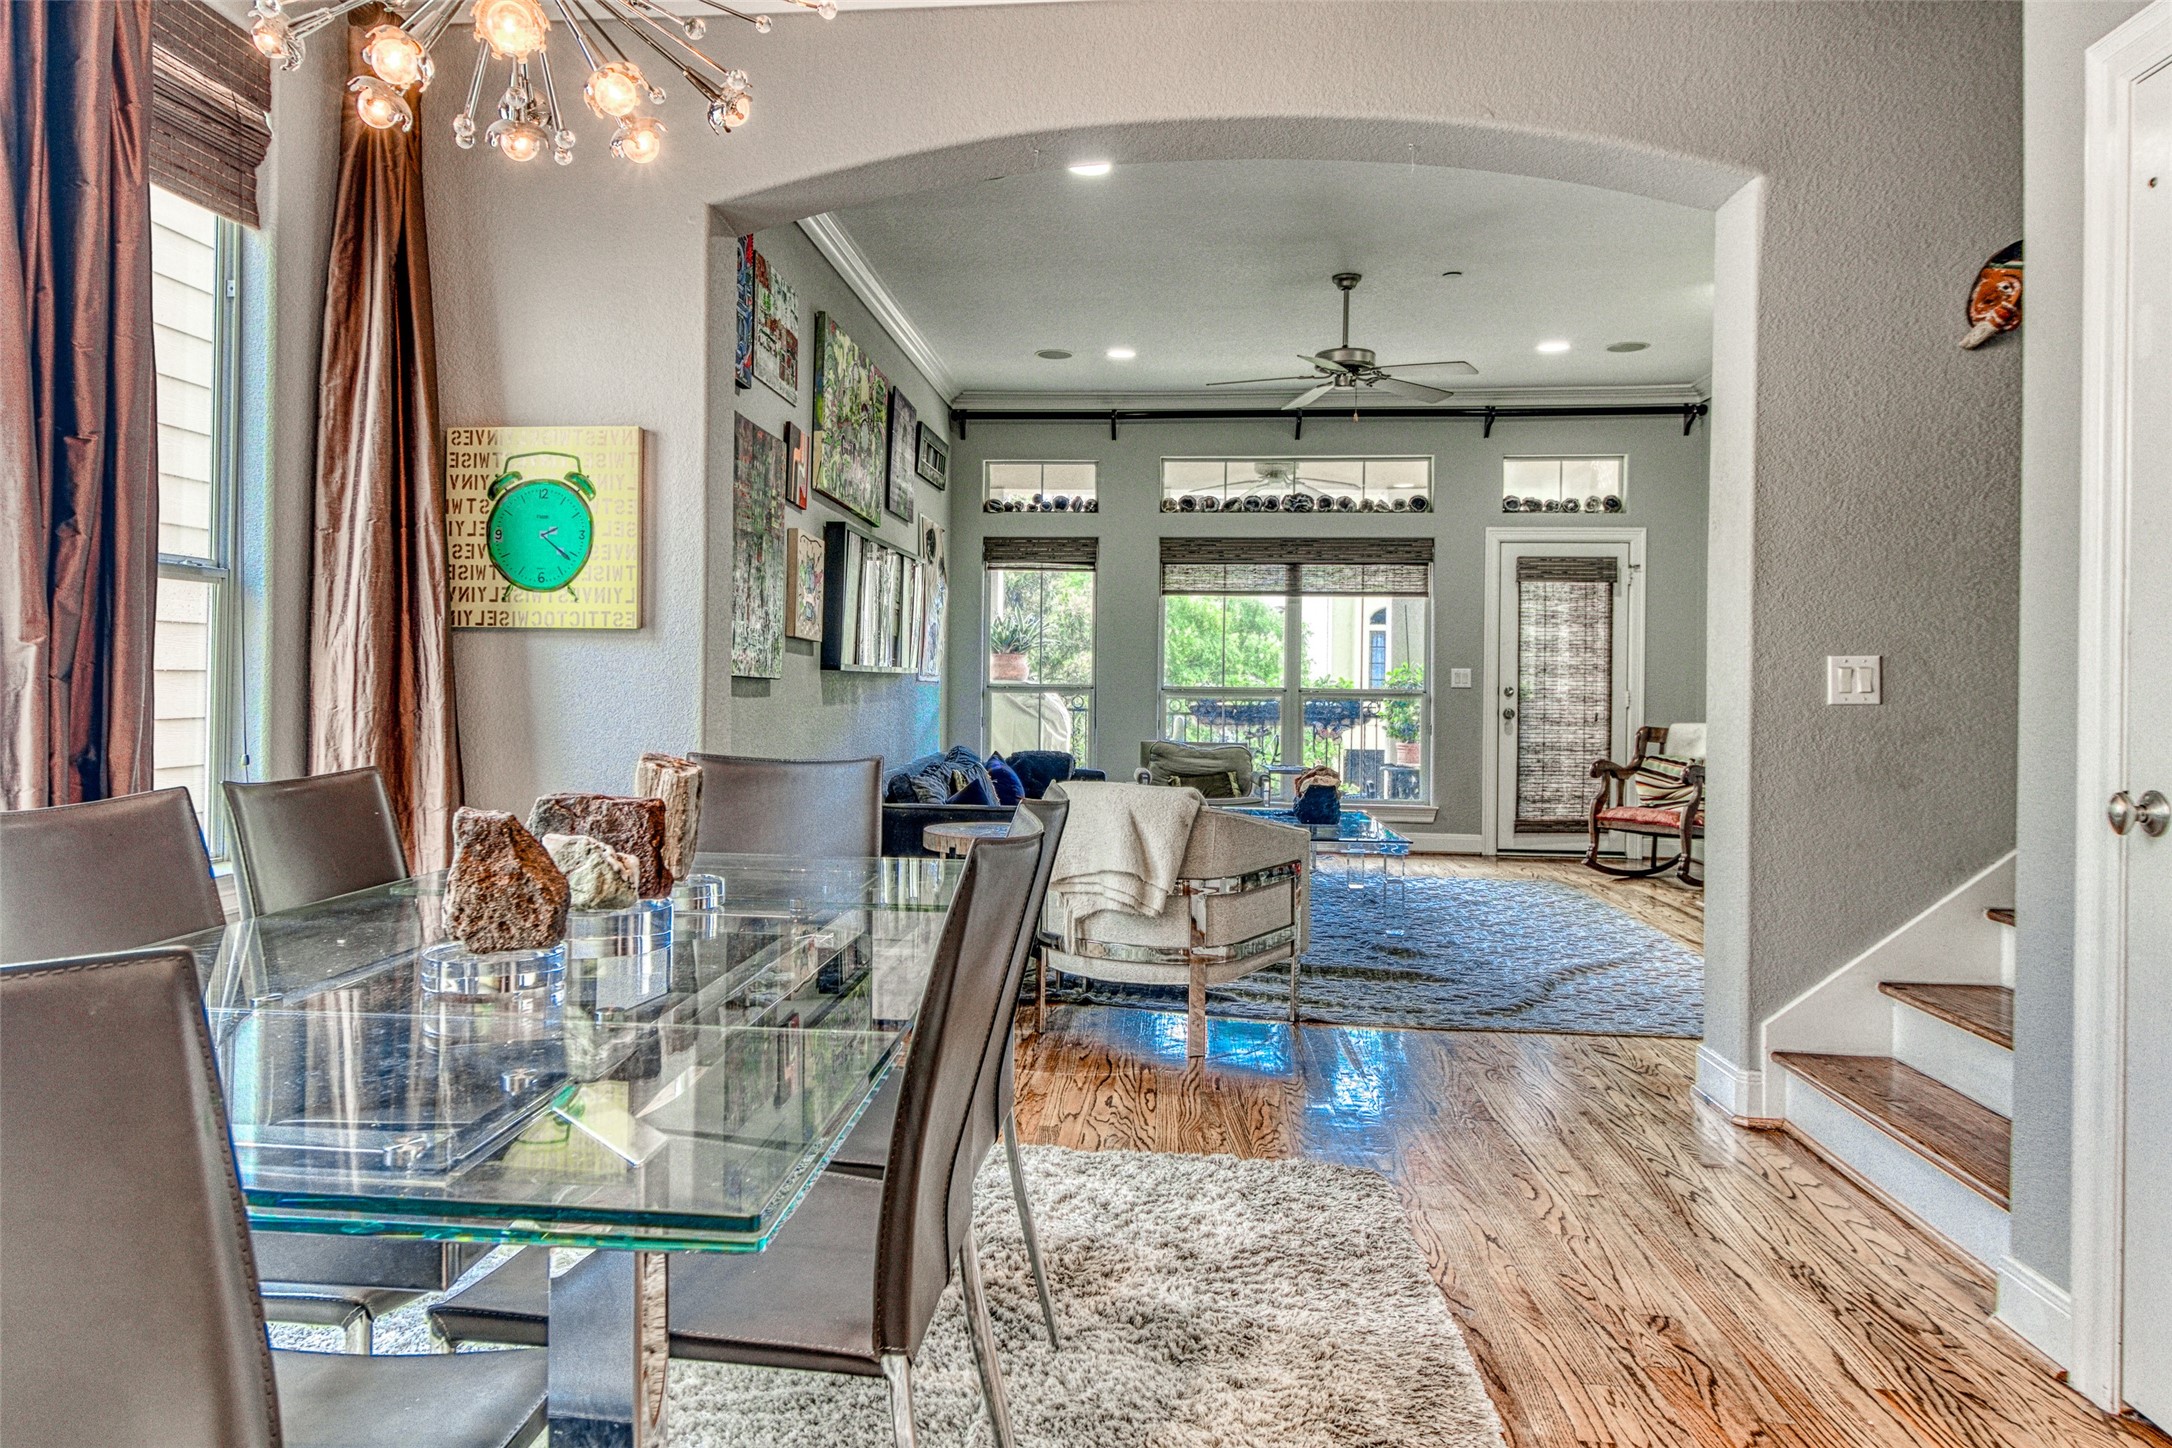 An abundance of natural light floods the home through large double-paned windows and transoms, soaring high ceilings, and recessed lighting combine to create a bright, airy ambiance in this open-concept floorplan.